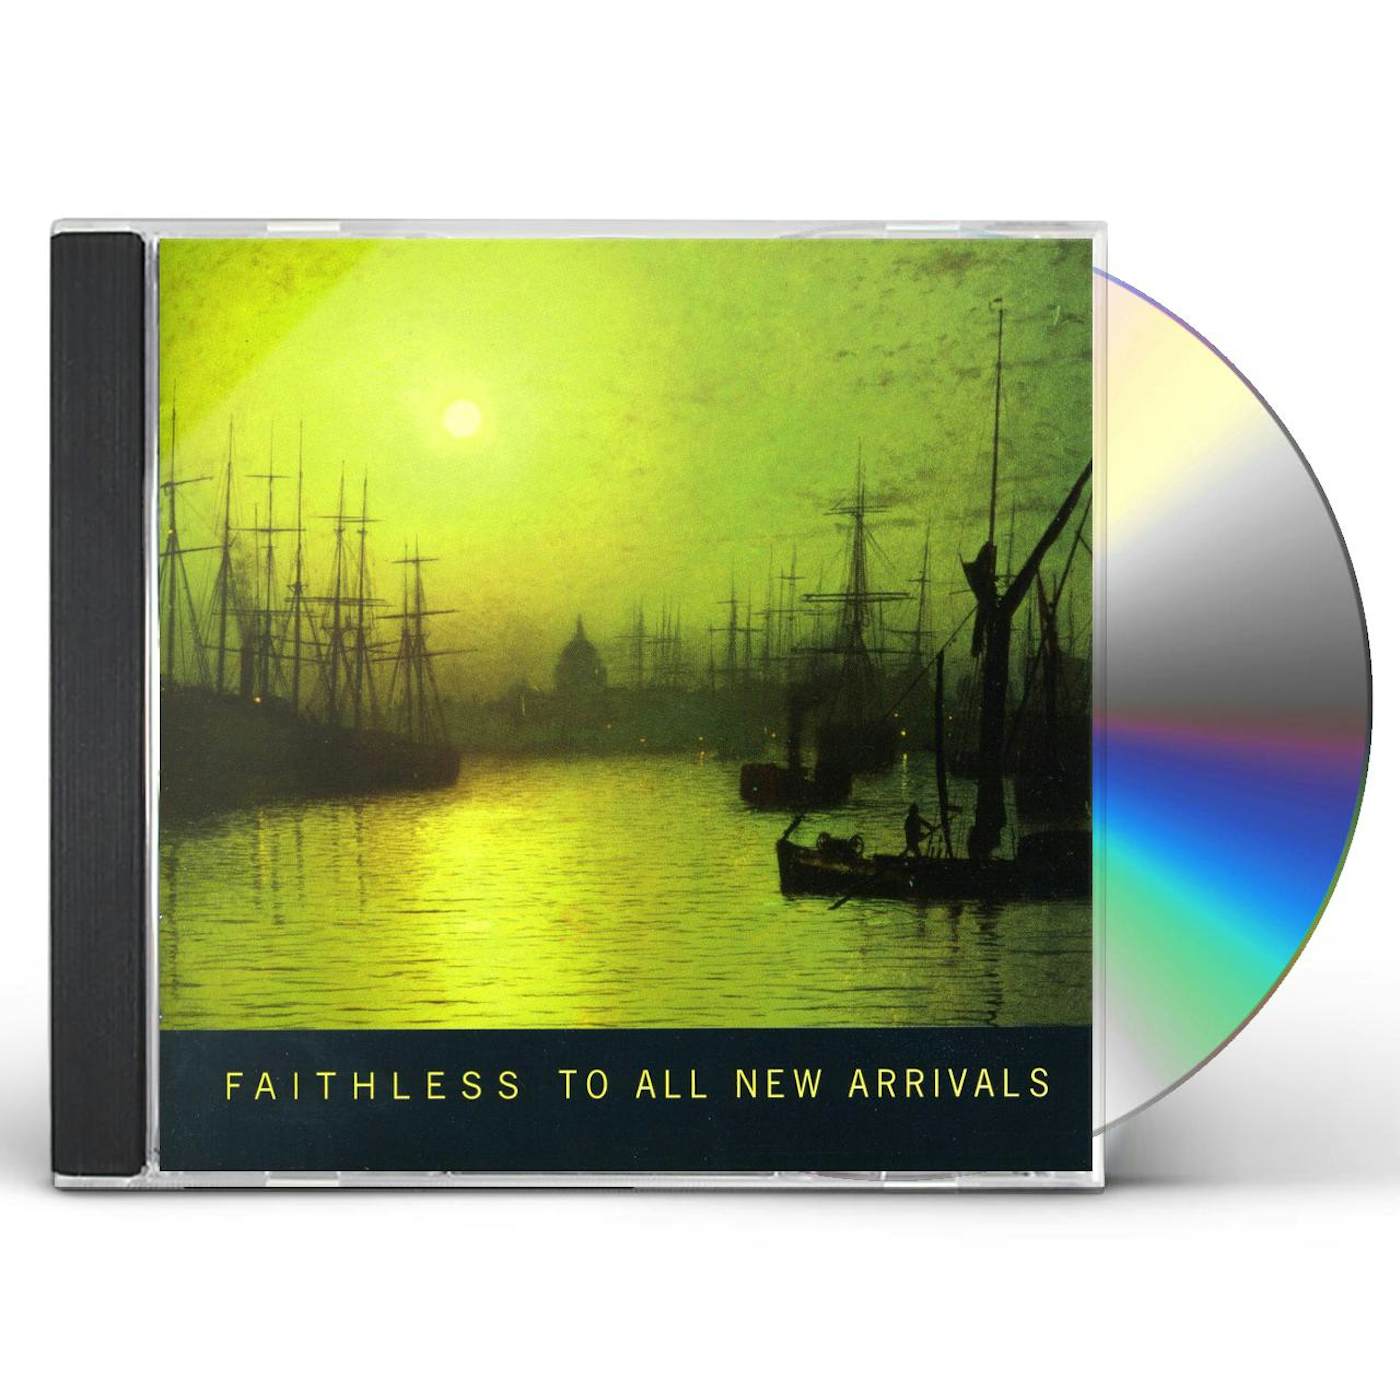 Faithless TO ALL NEW ARRIVALS CD